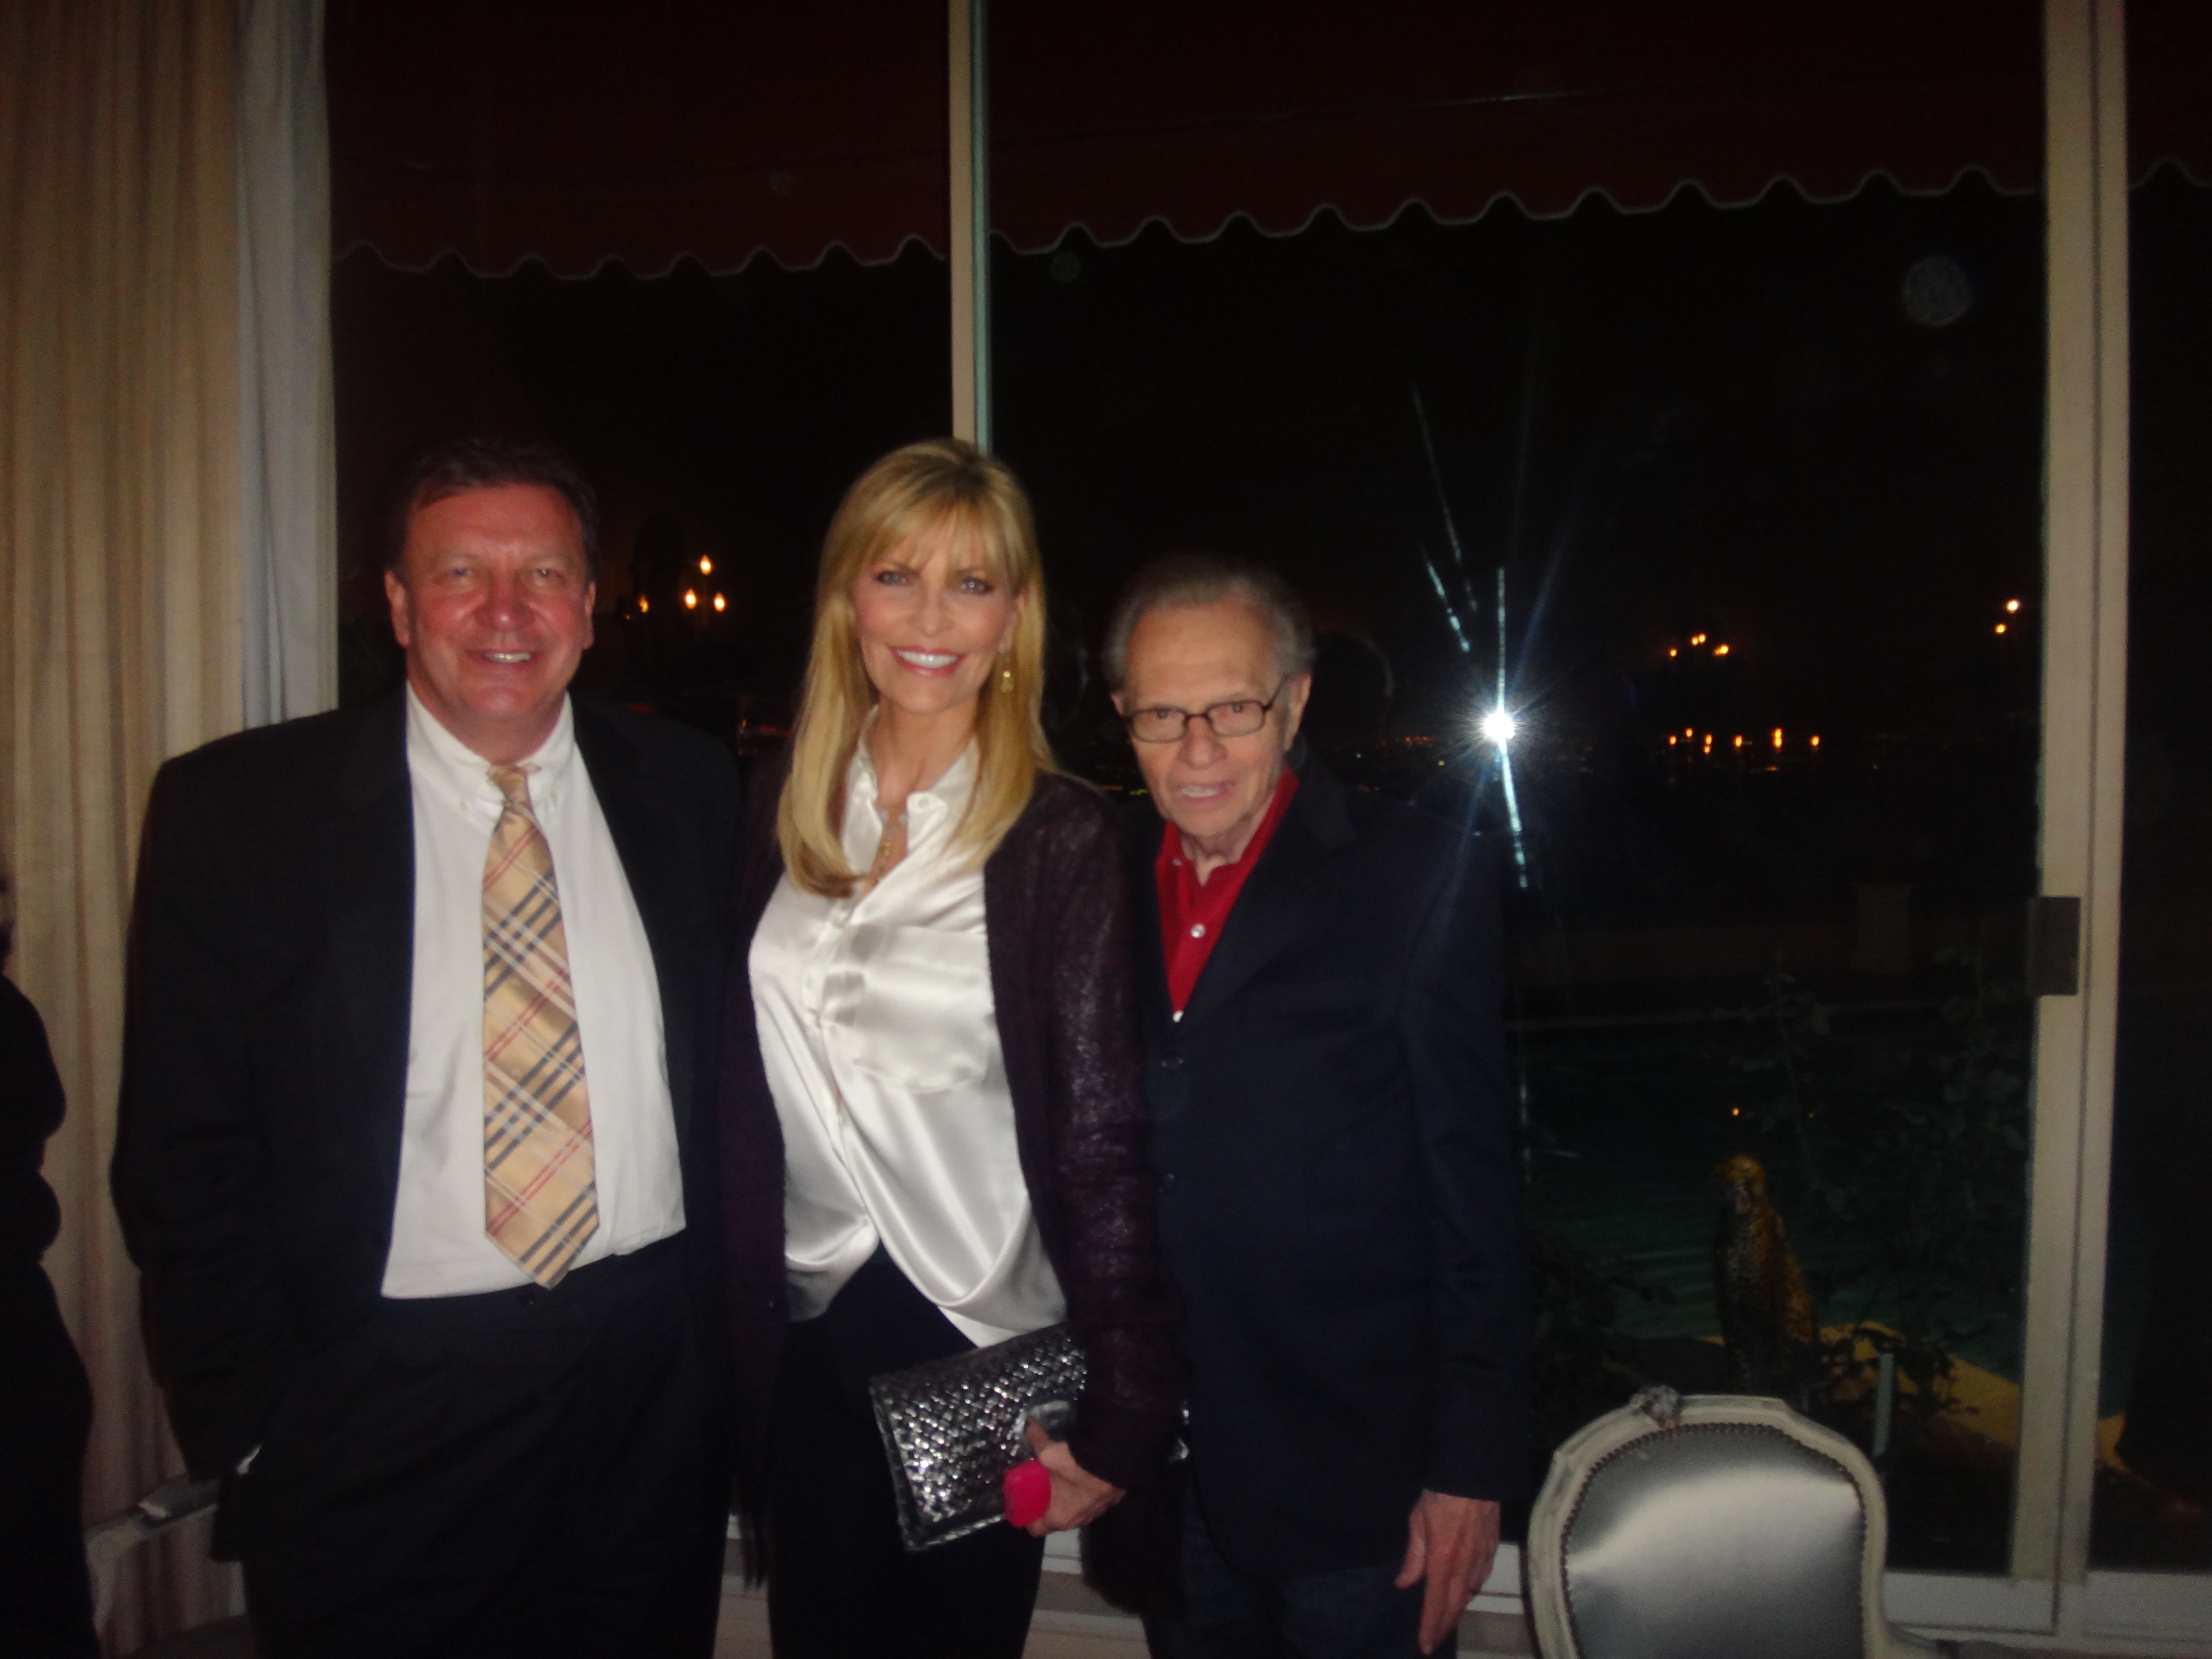 95th Birthday of Zsazsa Gabor party., with my freends Larry Kindg and his wife Snk at: